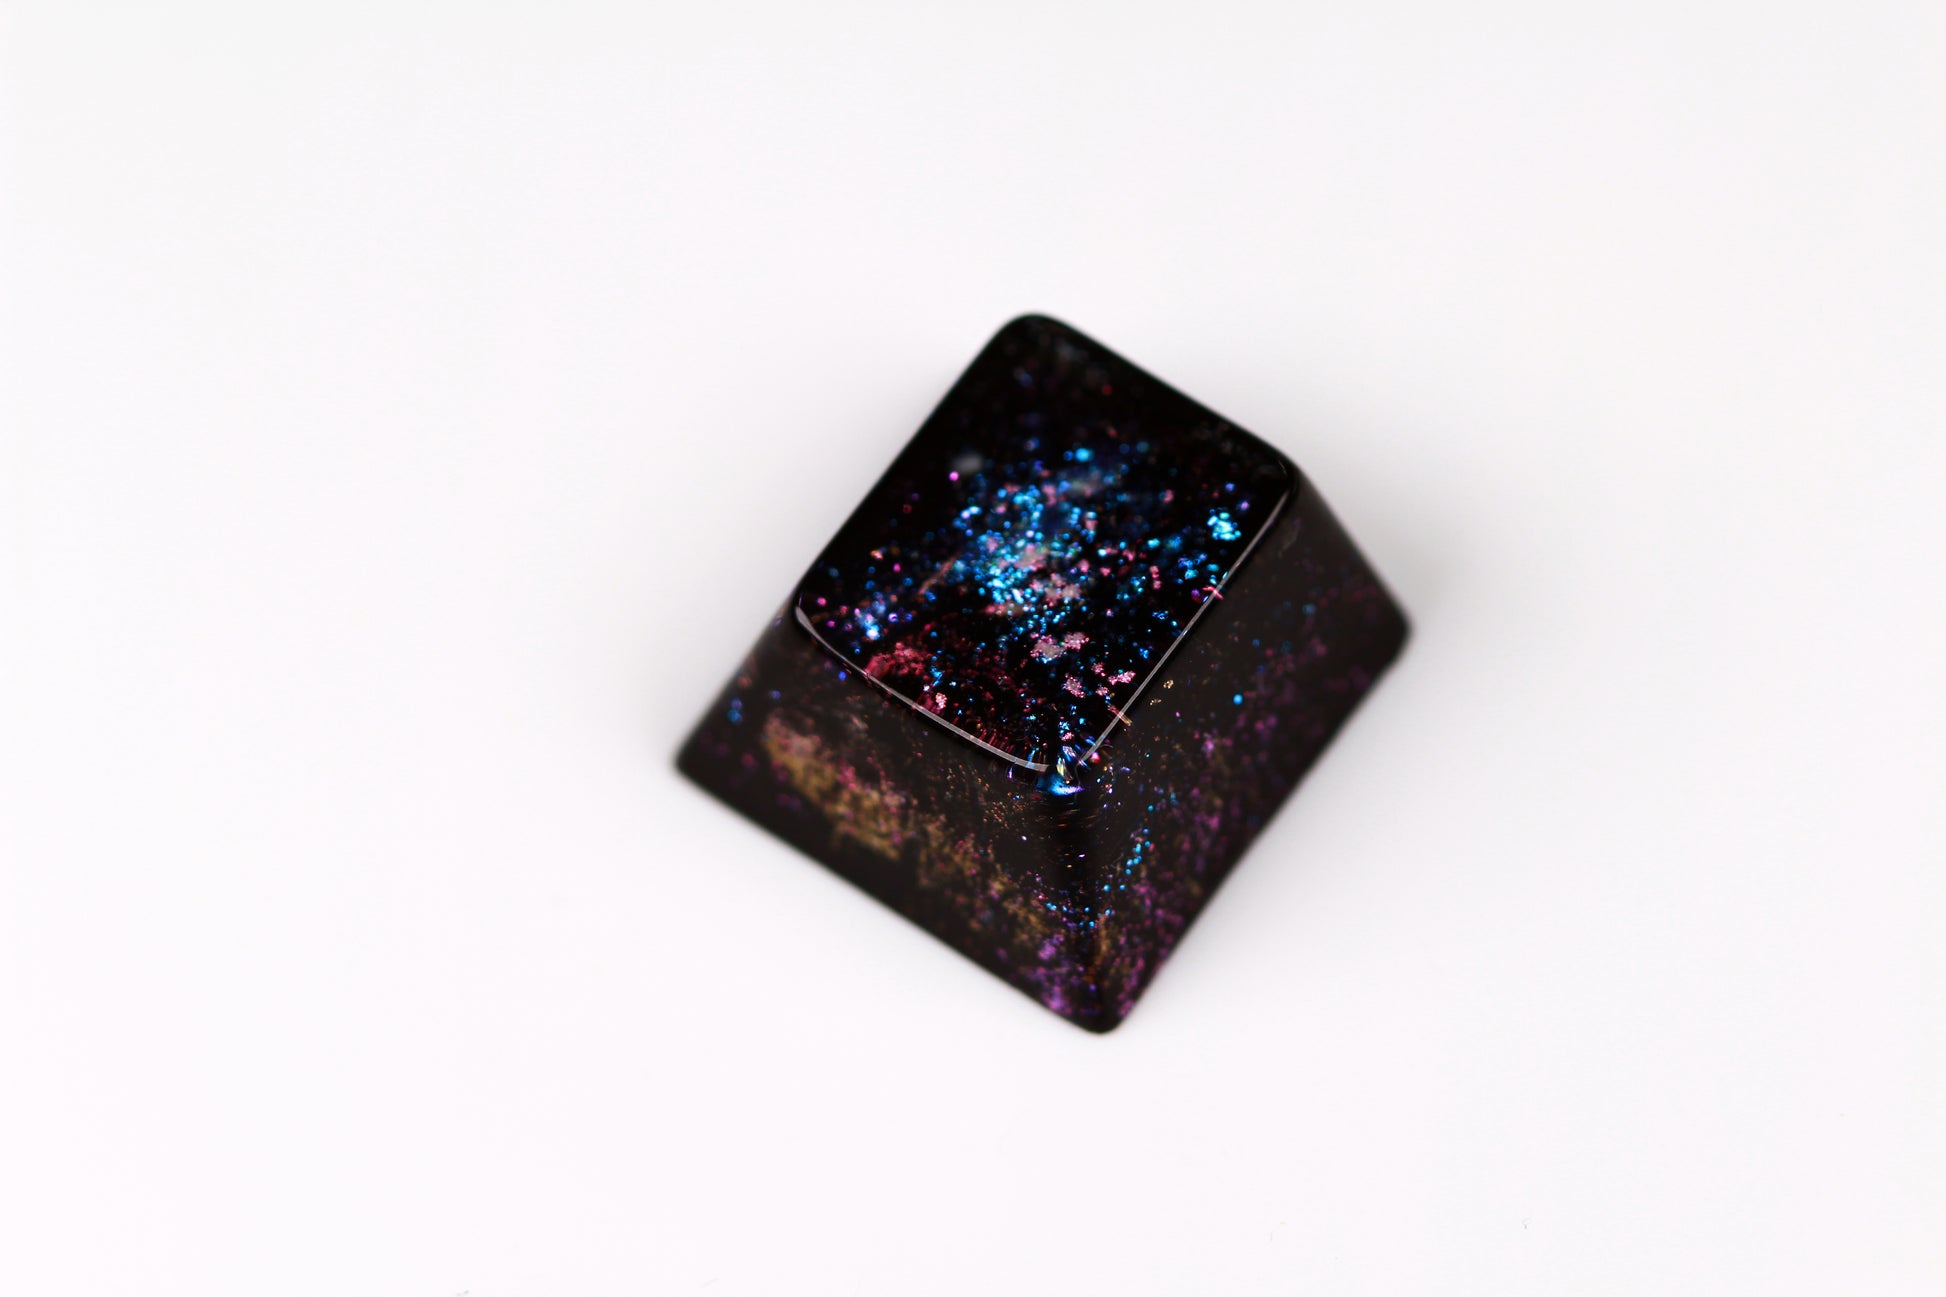 Cherry ESC - Deep Field Particle Stream 3 - PrimeCaps Keycap - Blank and Sculpted Artisan Keycaps for cherry MX mechanical keyboards 